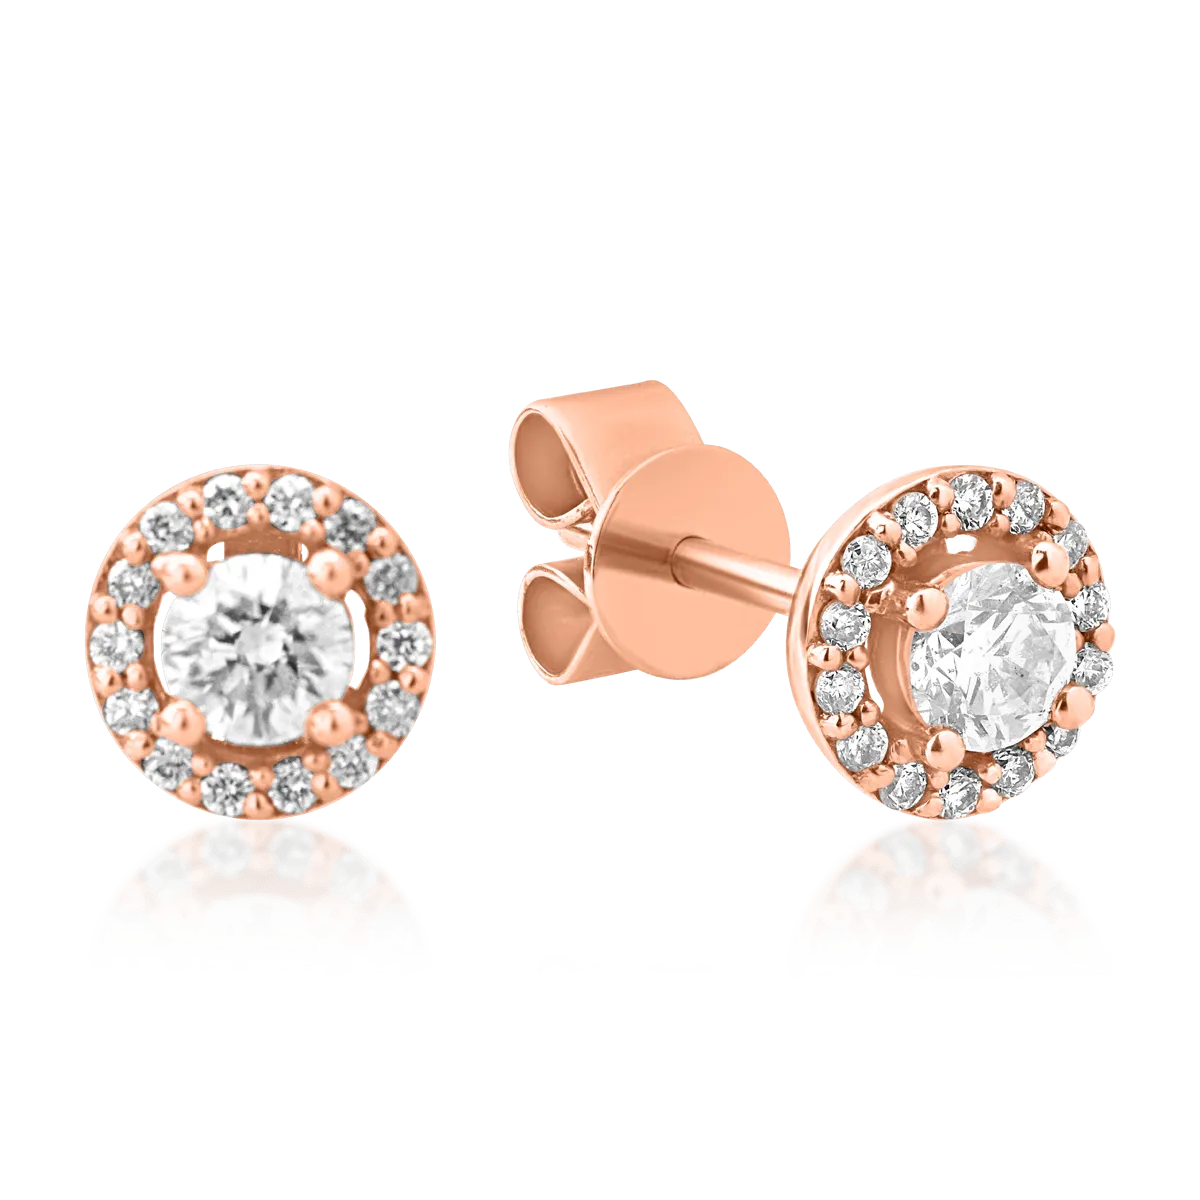 18K rose gold earrings with 0.34ct diamonds